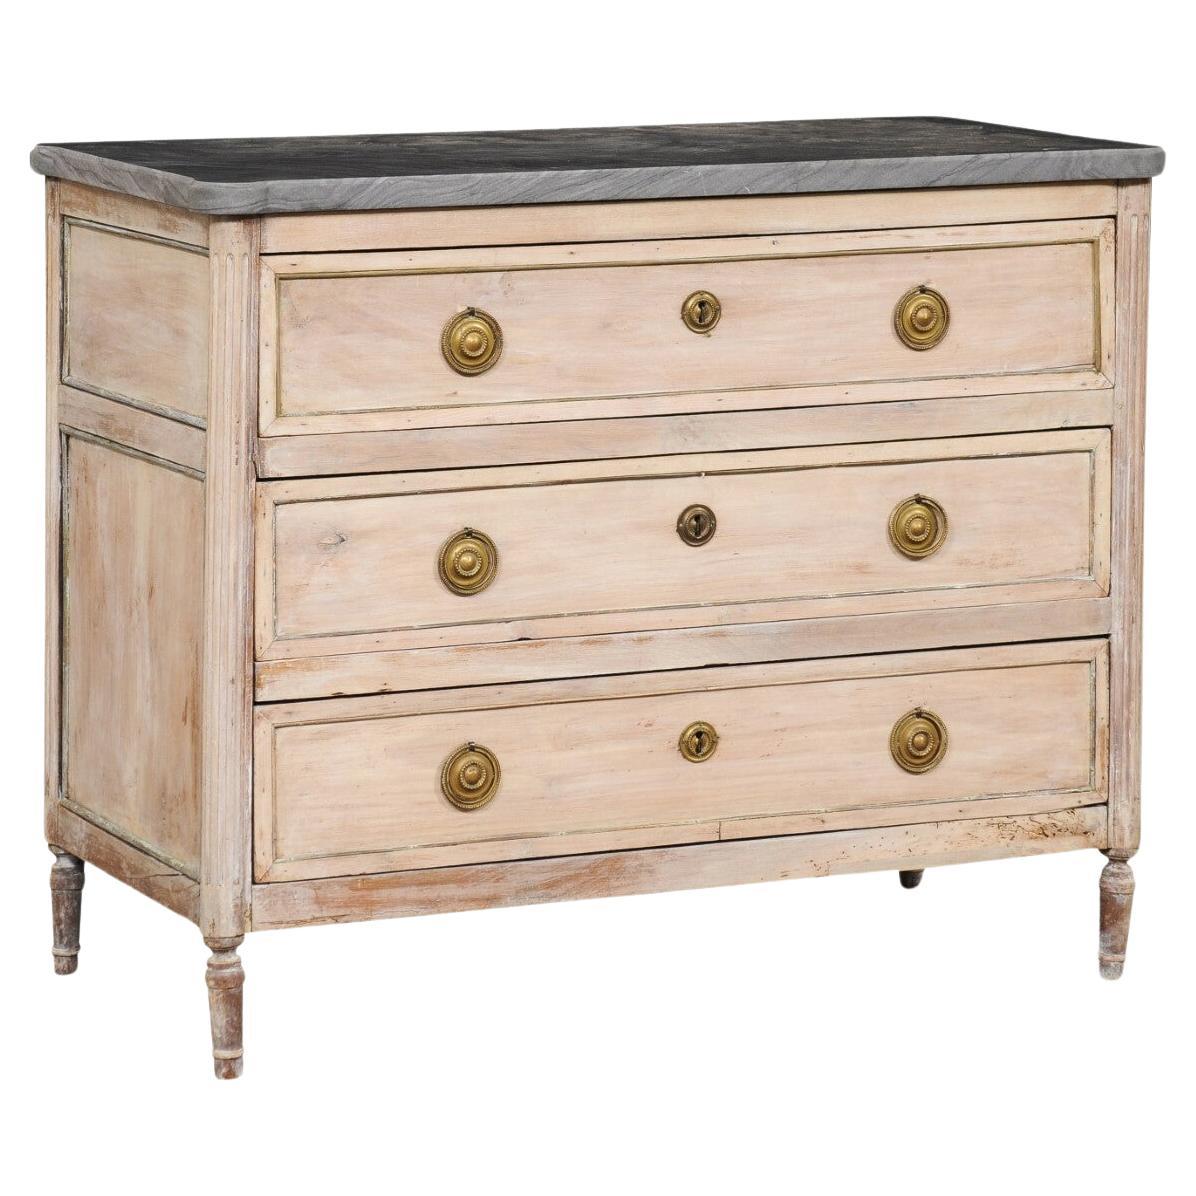 Period Neoclassic French Commode w/a Gorgeous New Custom Grey Marble Top For Sale